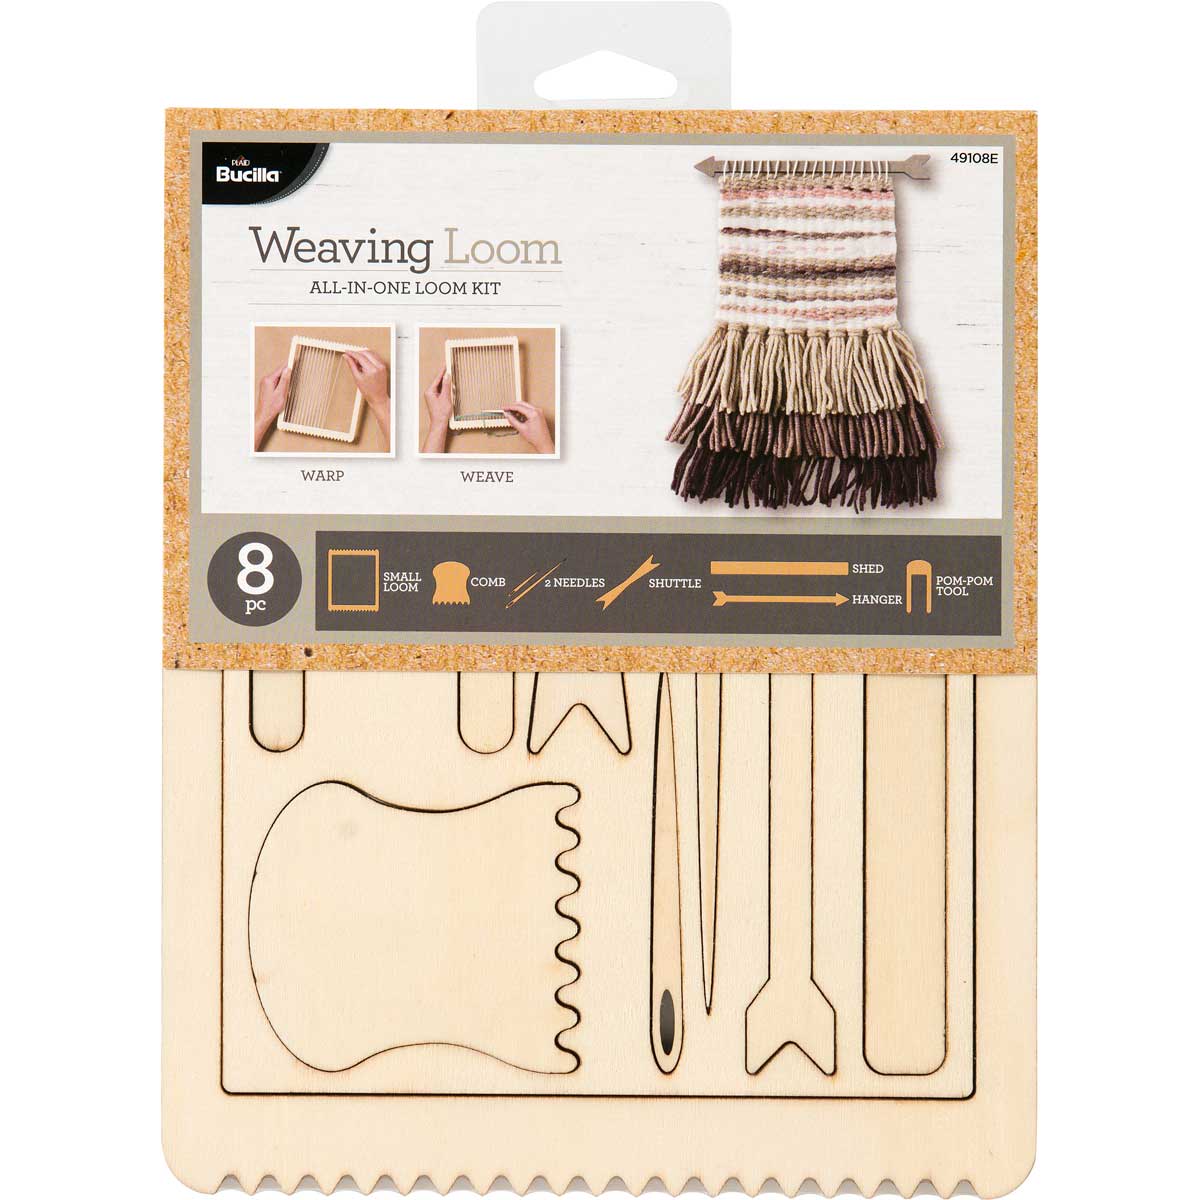 Shop Plaid Bucilla ® Weaving Loom All-In-One Kit - Rectangle, 8 piece -  49108 - 49108